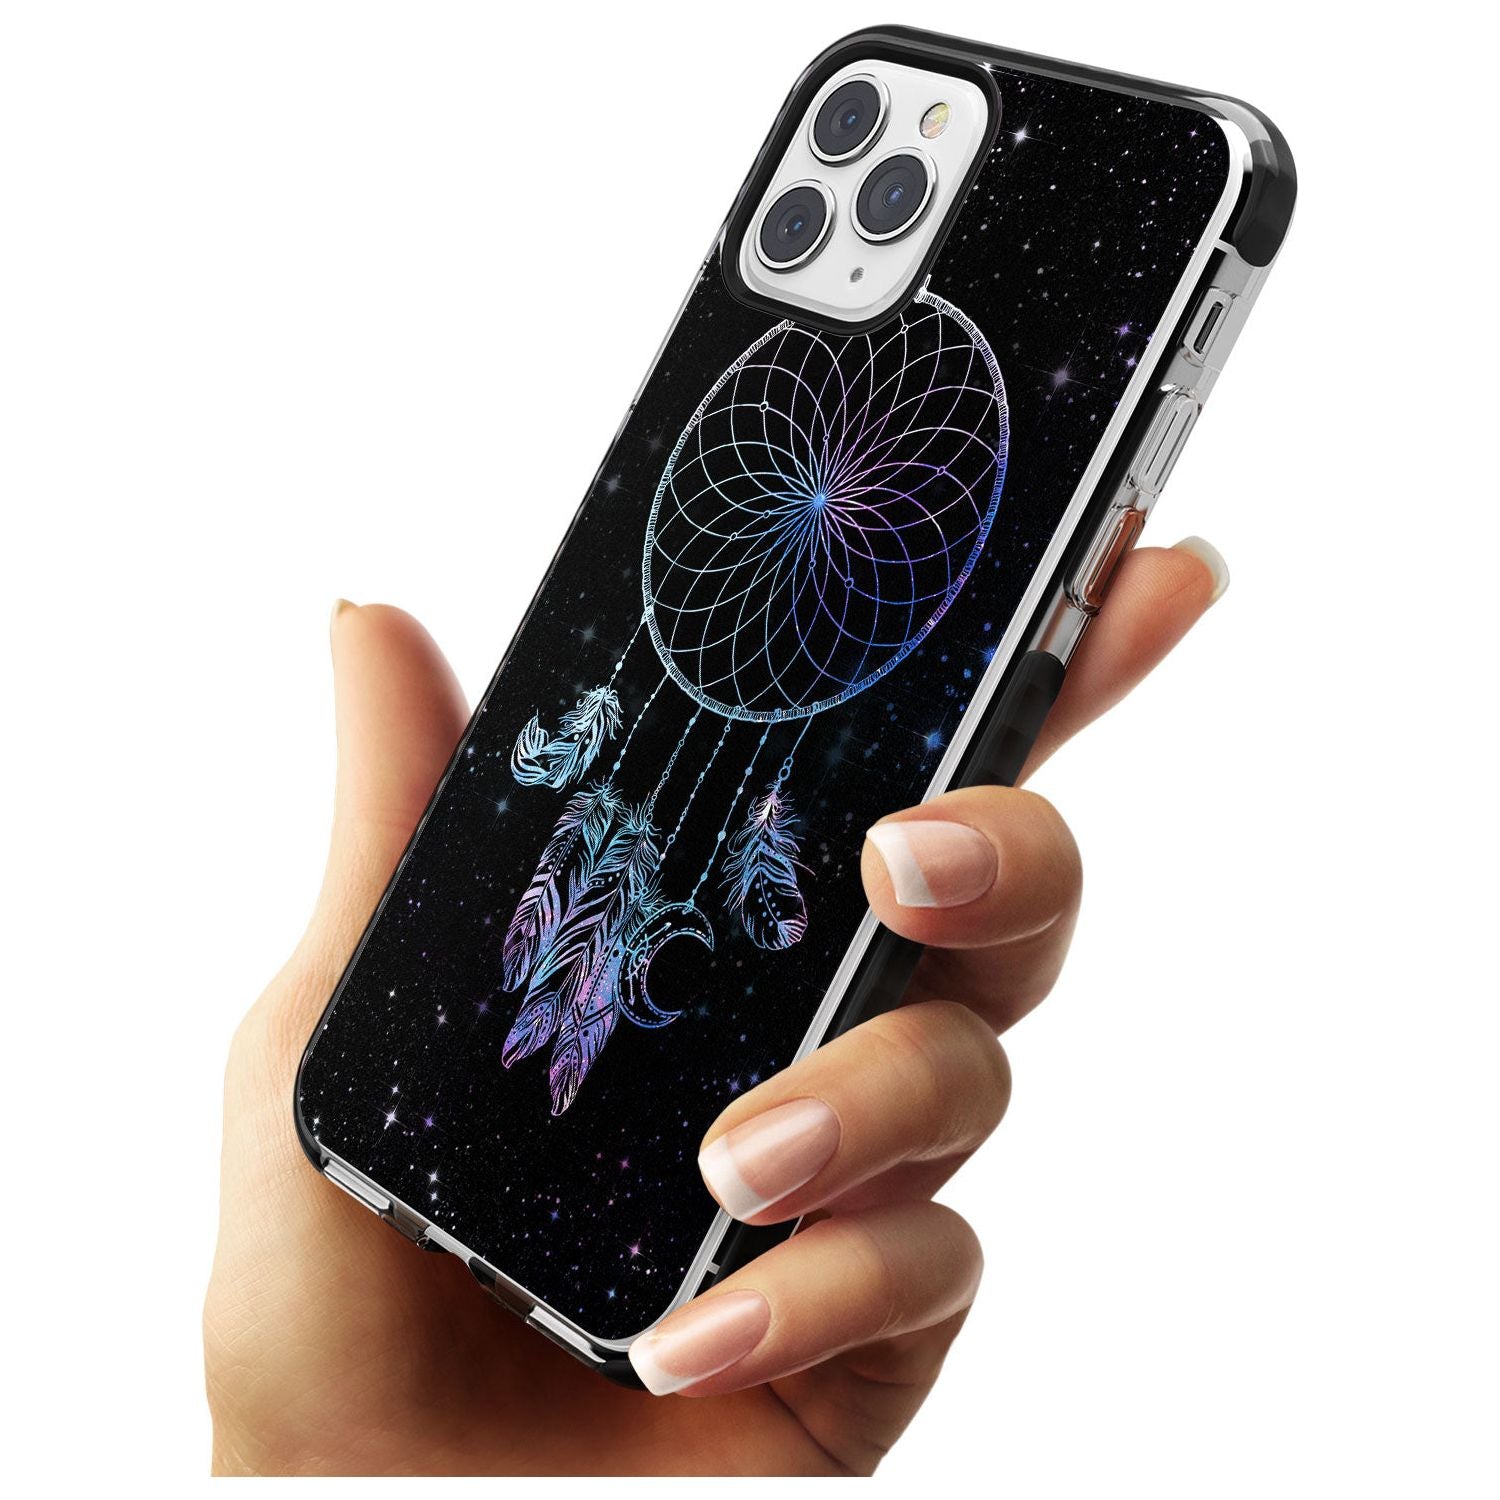 Dreamcatcher Space Stars Galaxy Print Black Impact Phone Case for iPhone 11 Pro Max